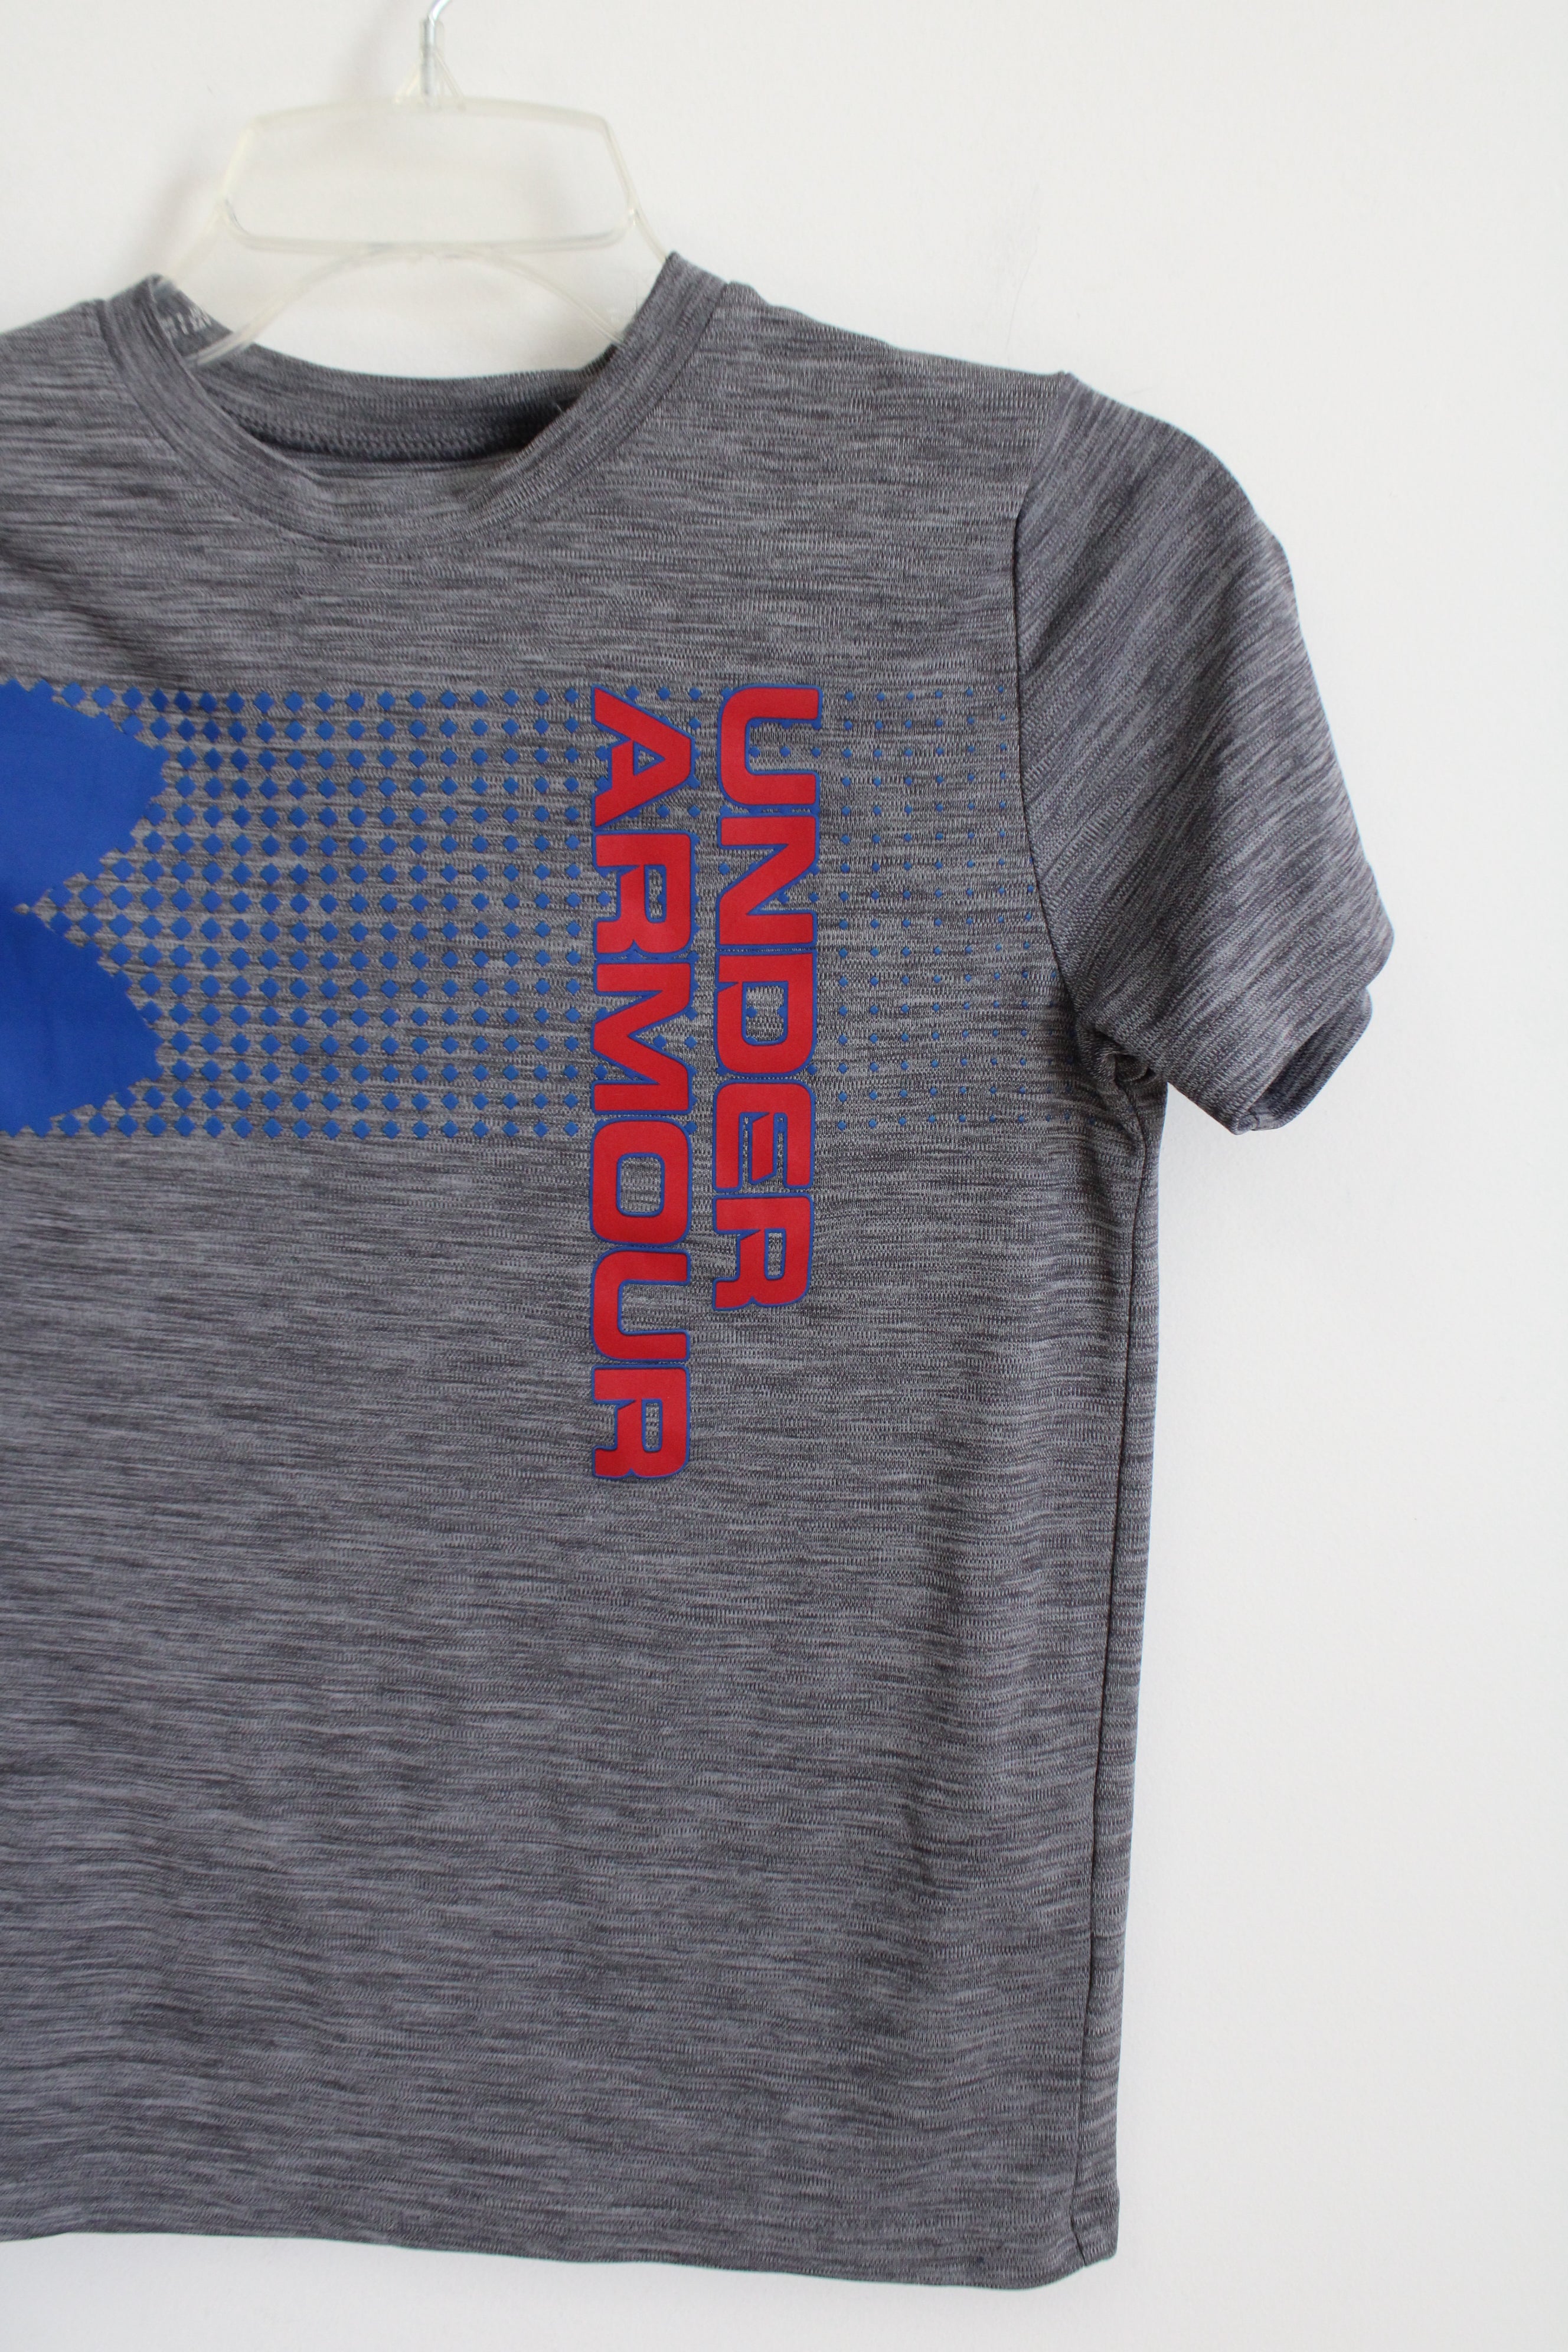 Under Armour Red & Blue Logo Gray Shirt | Youth M (10/12)